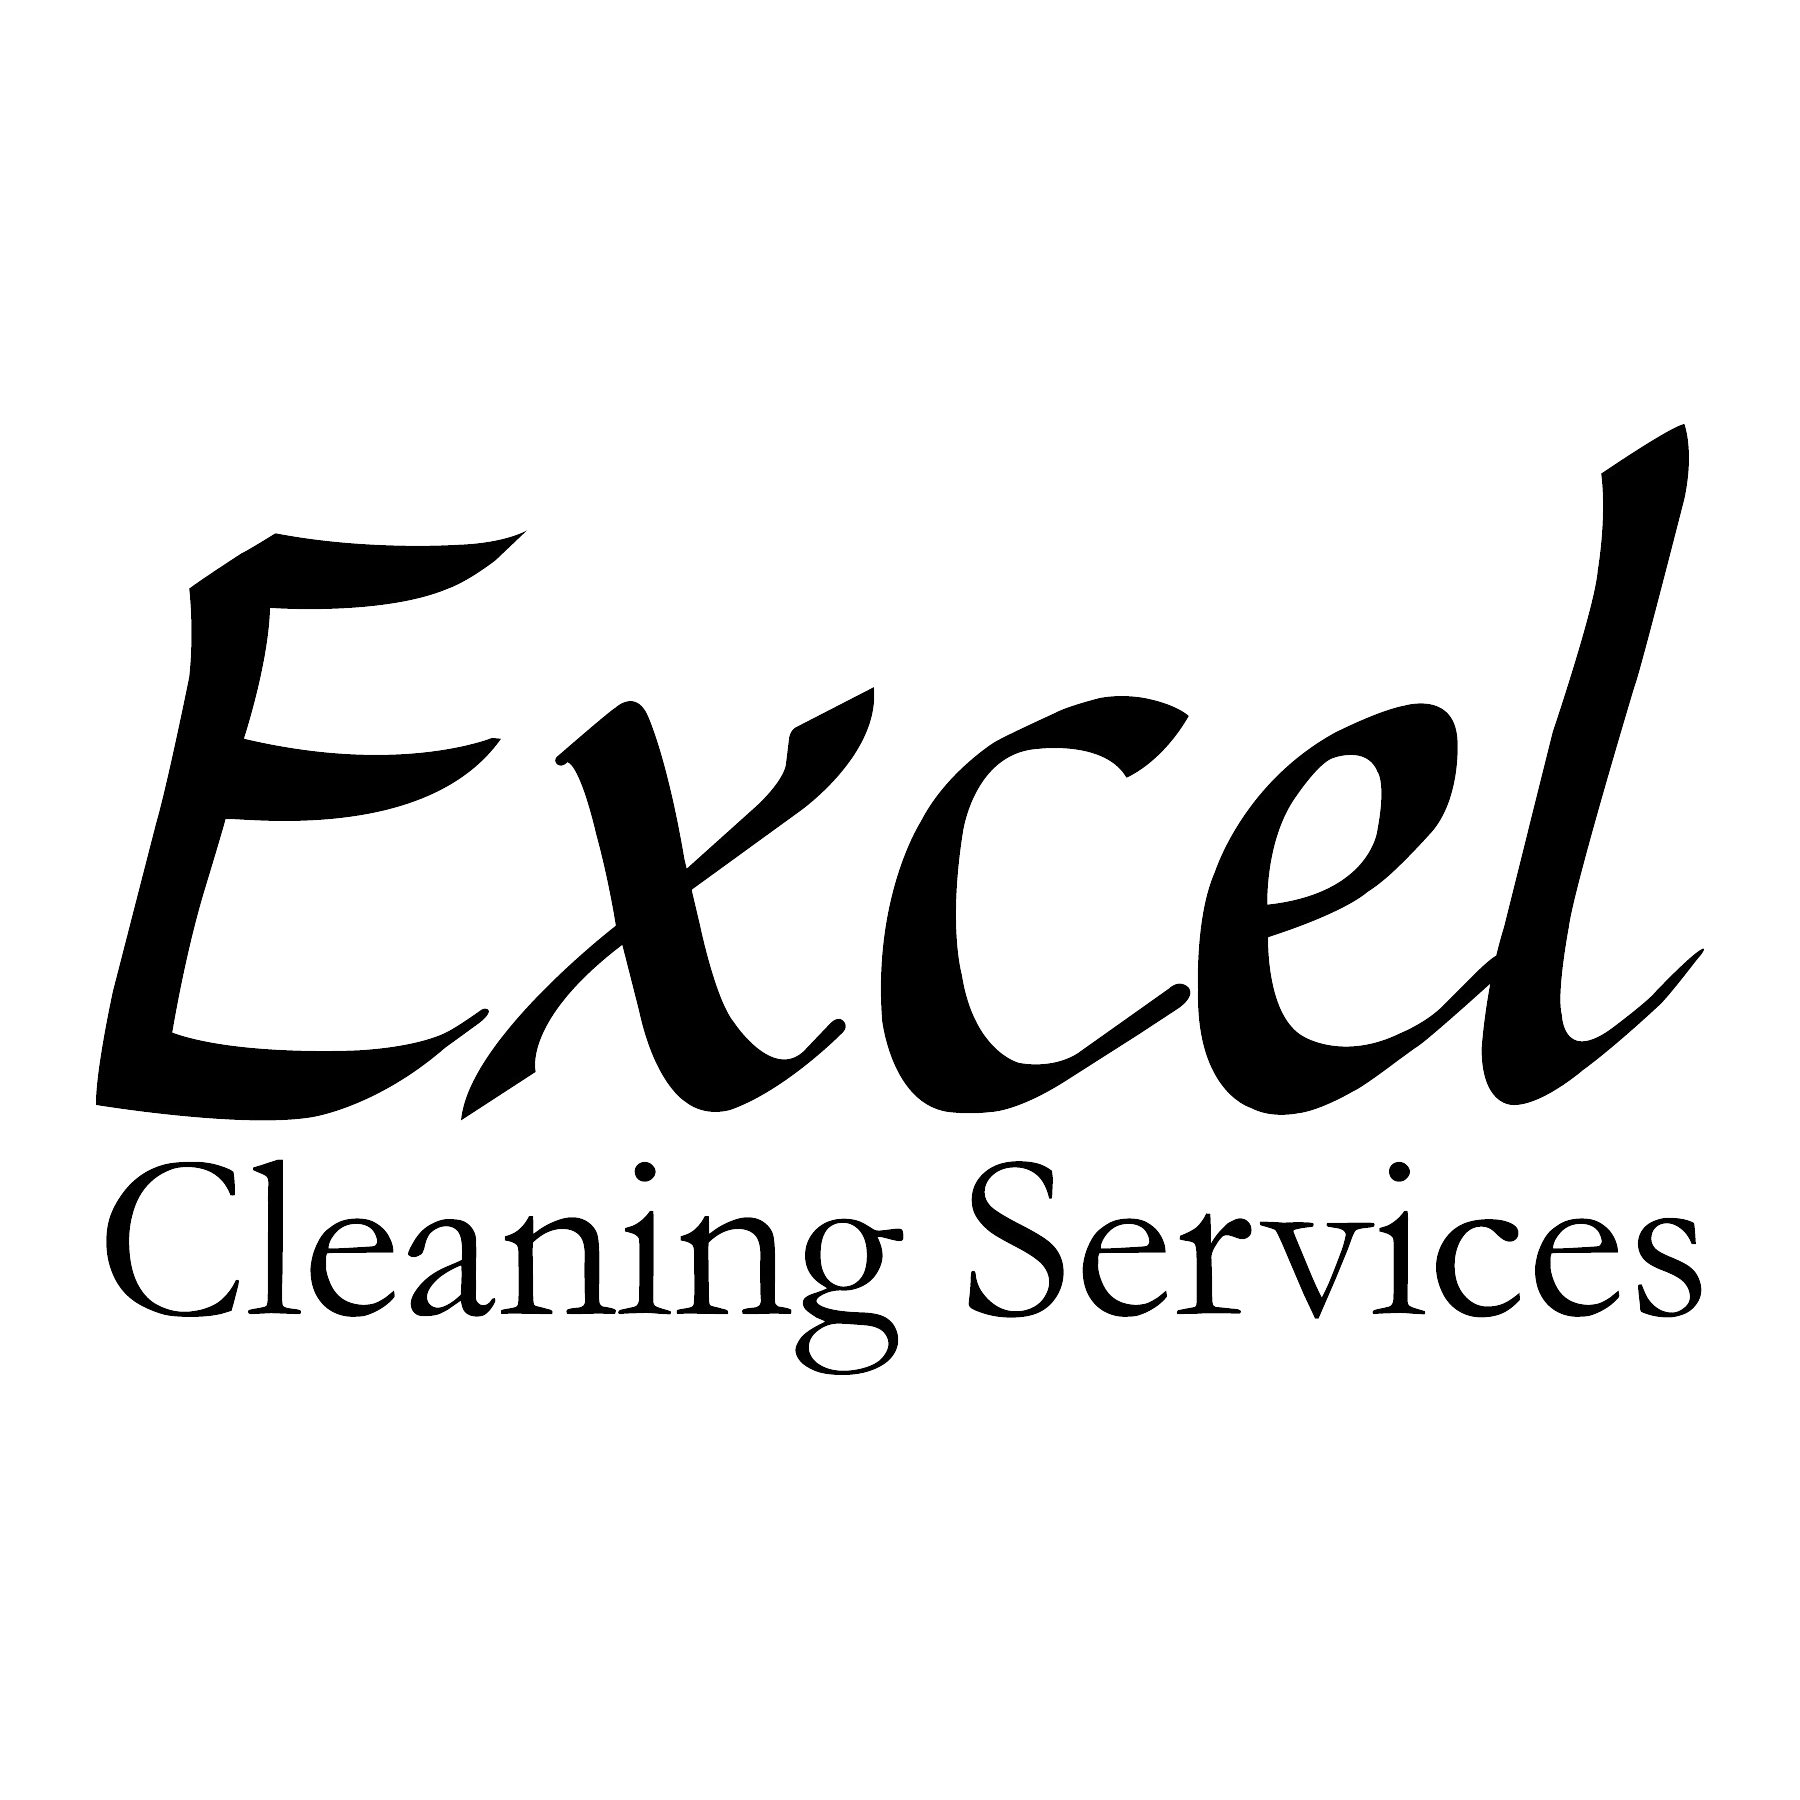 Excel Cleaning Services - Nashville, TN 37203 - (615)544-1235 | ShowMeLocal.com